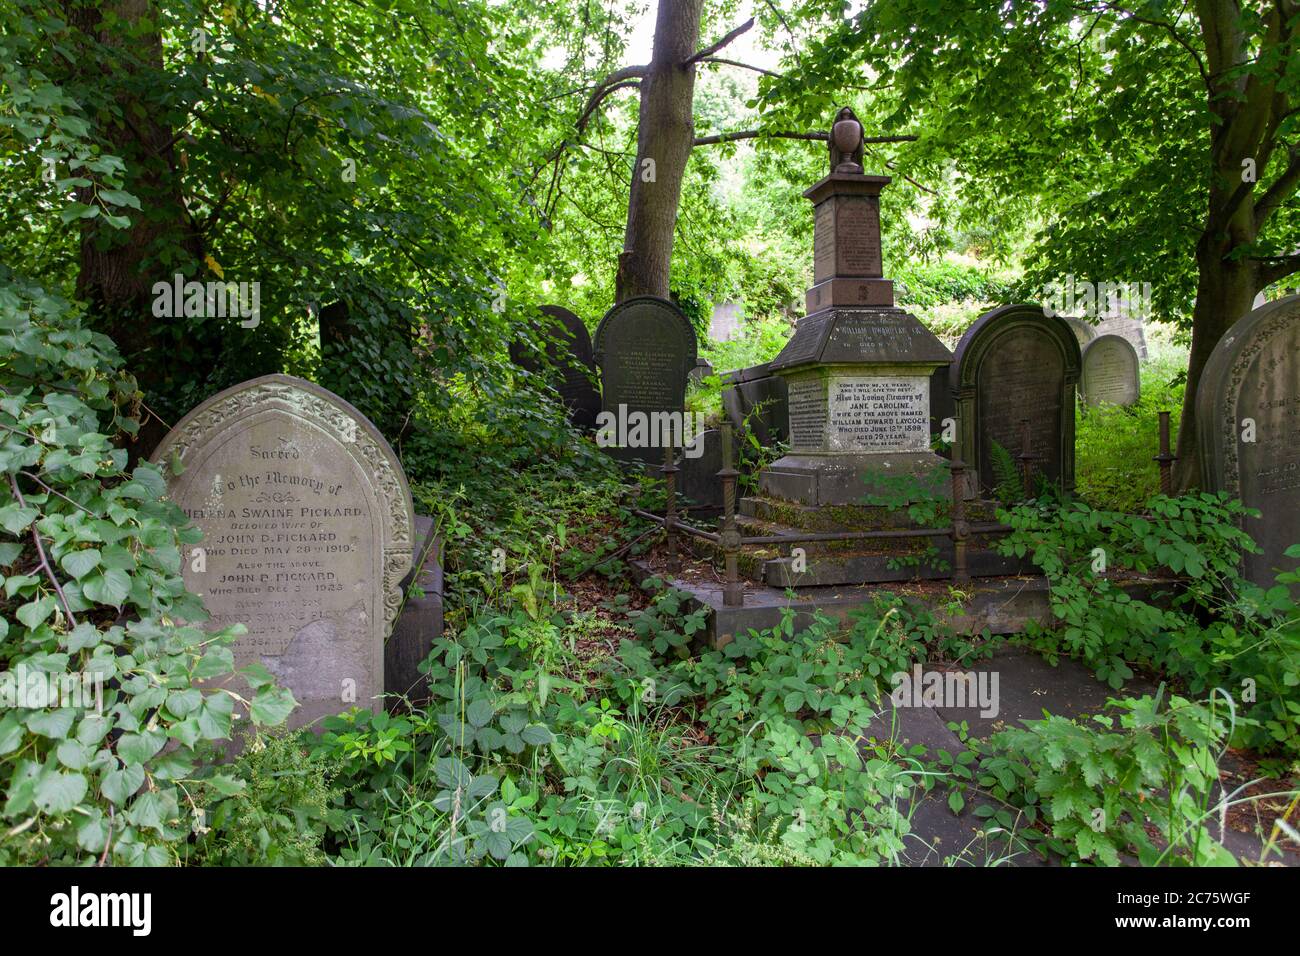 Sheffield General Cemetery is an old disused cemetery containing many graves of Sheffield's notable victorians. It is now overgrown. Stock Photo